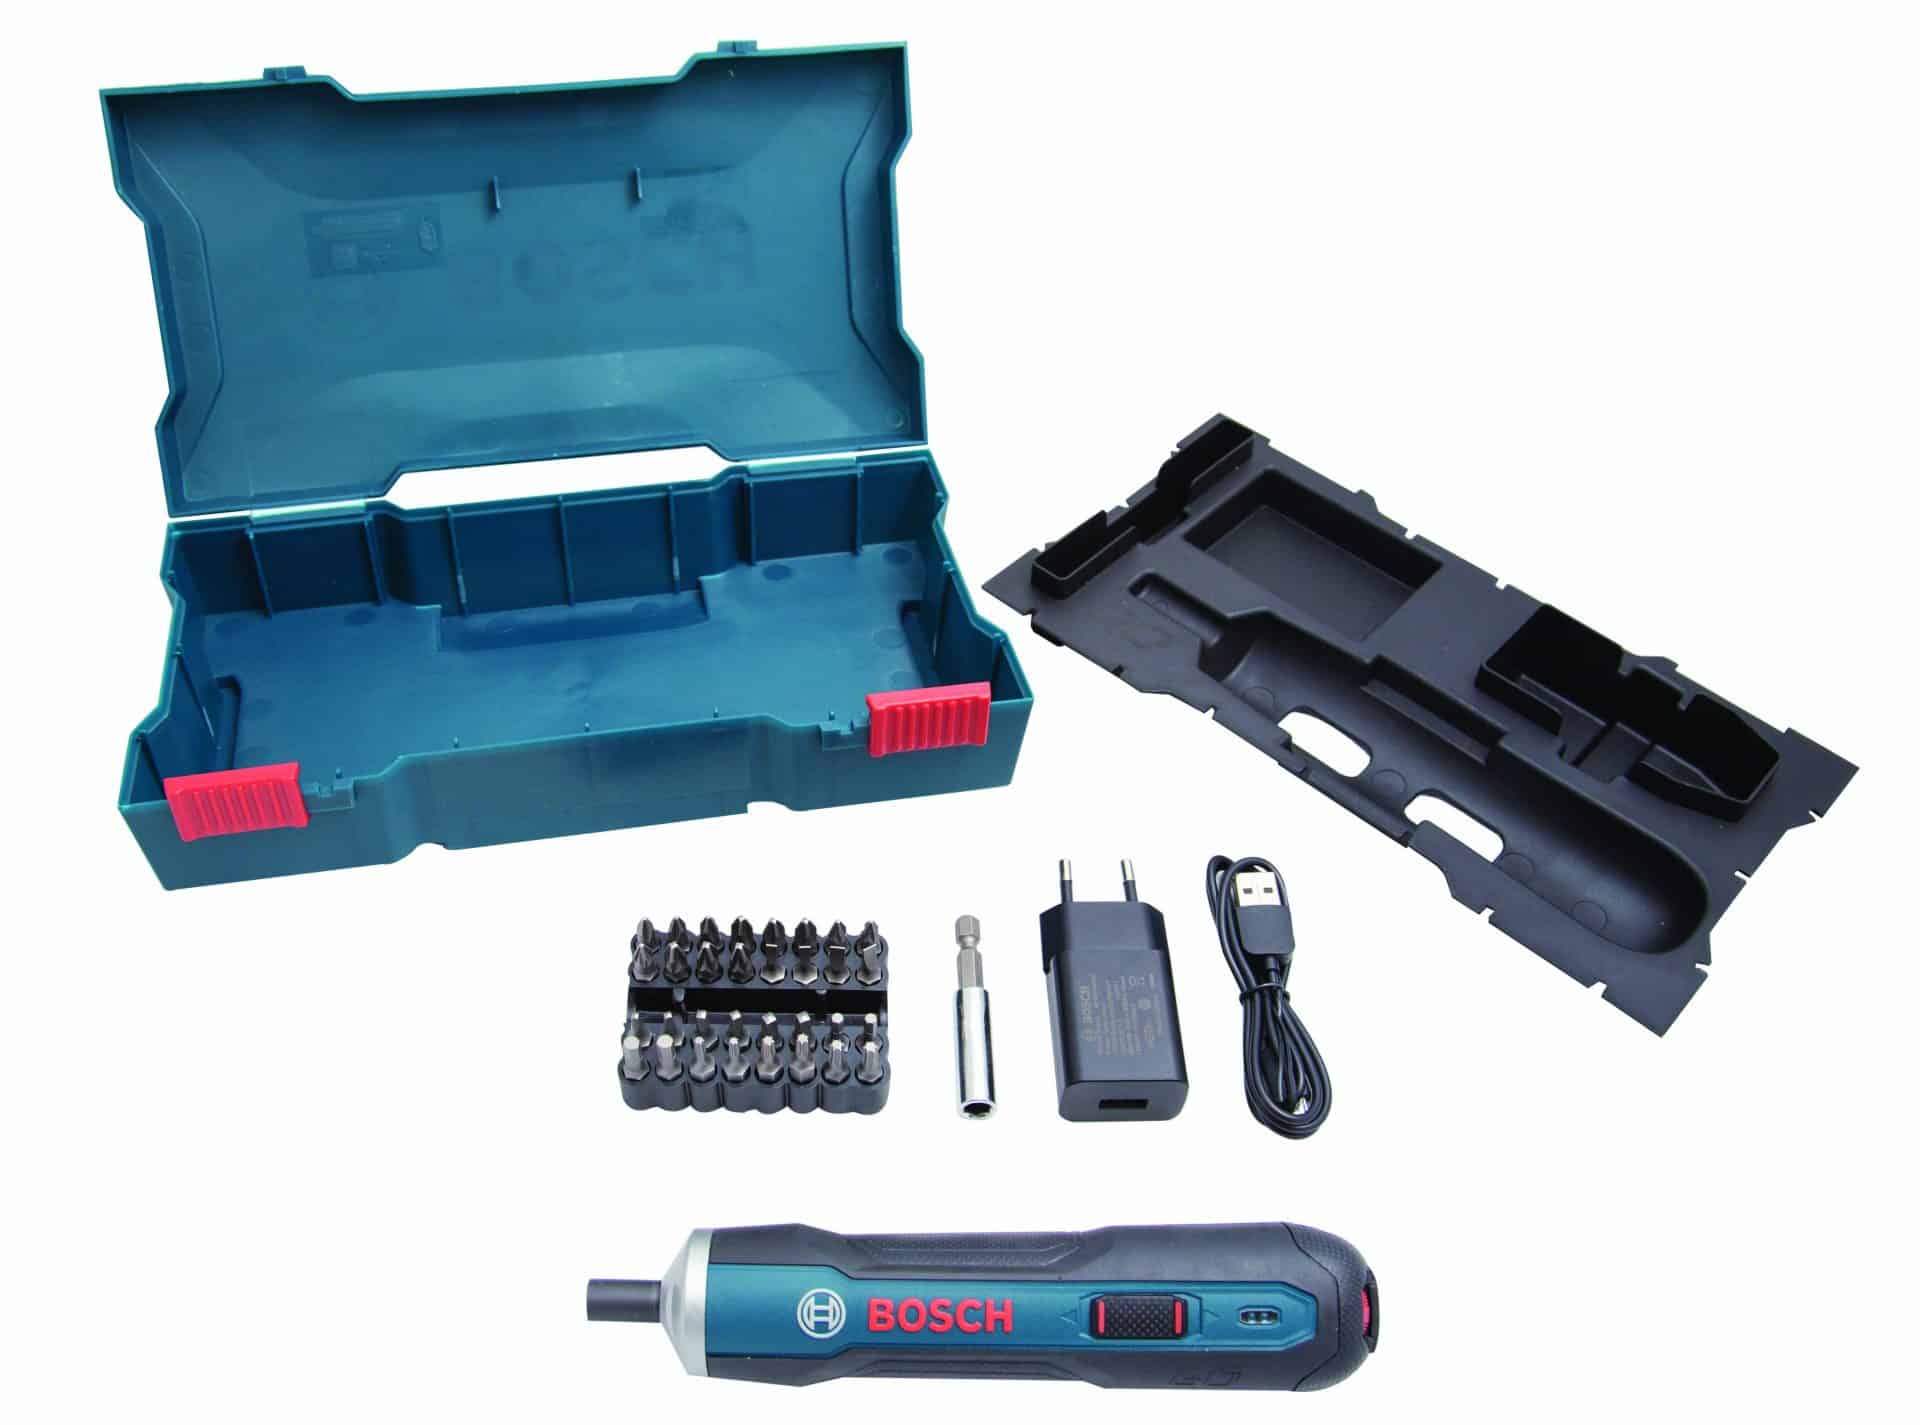 Bosch Power Tools Launches Bosch Go - The Smart Screwdriver 1